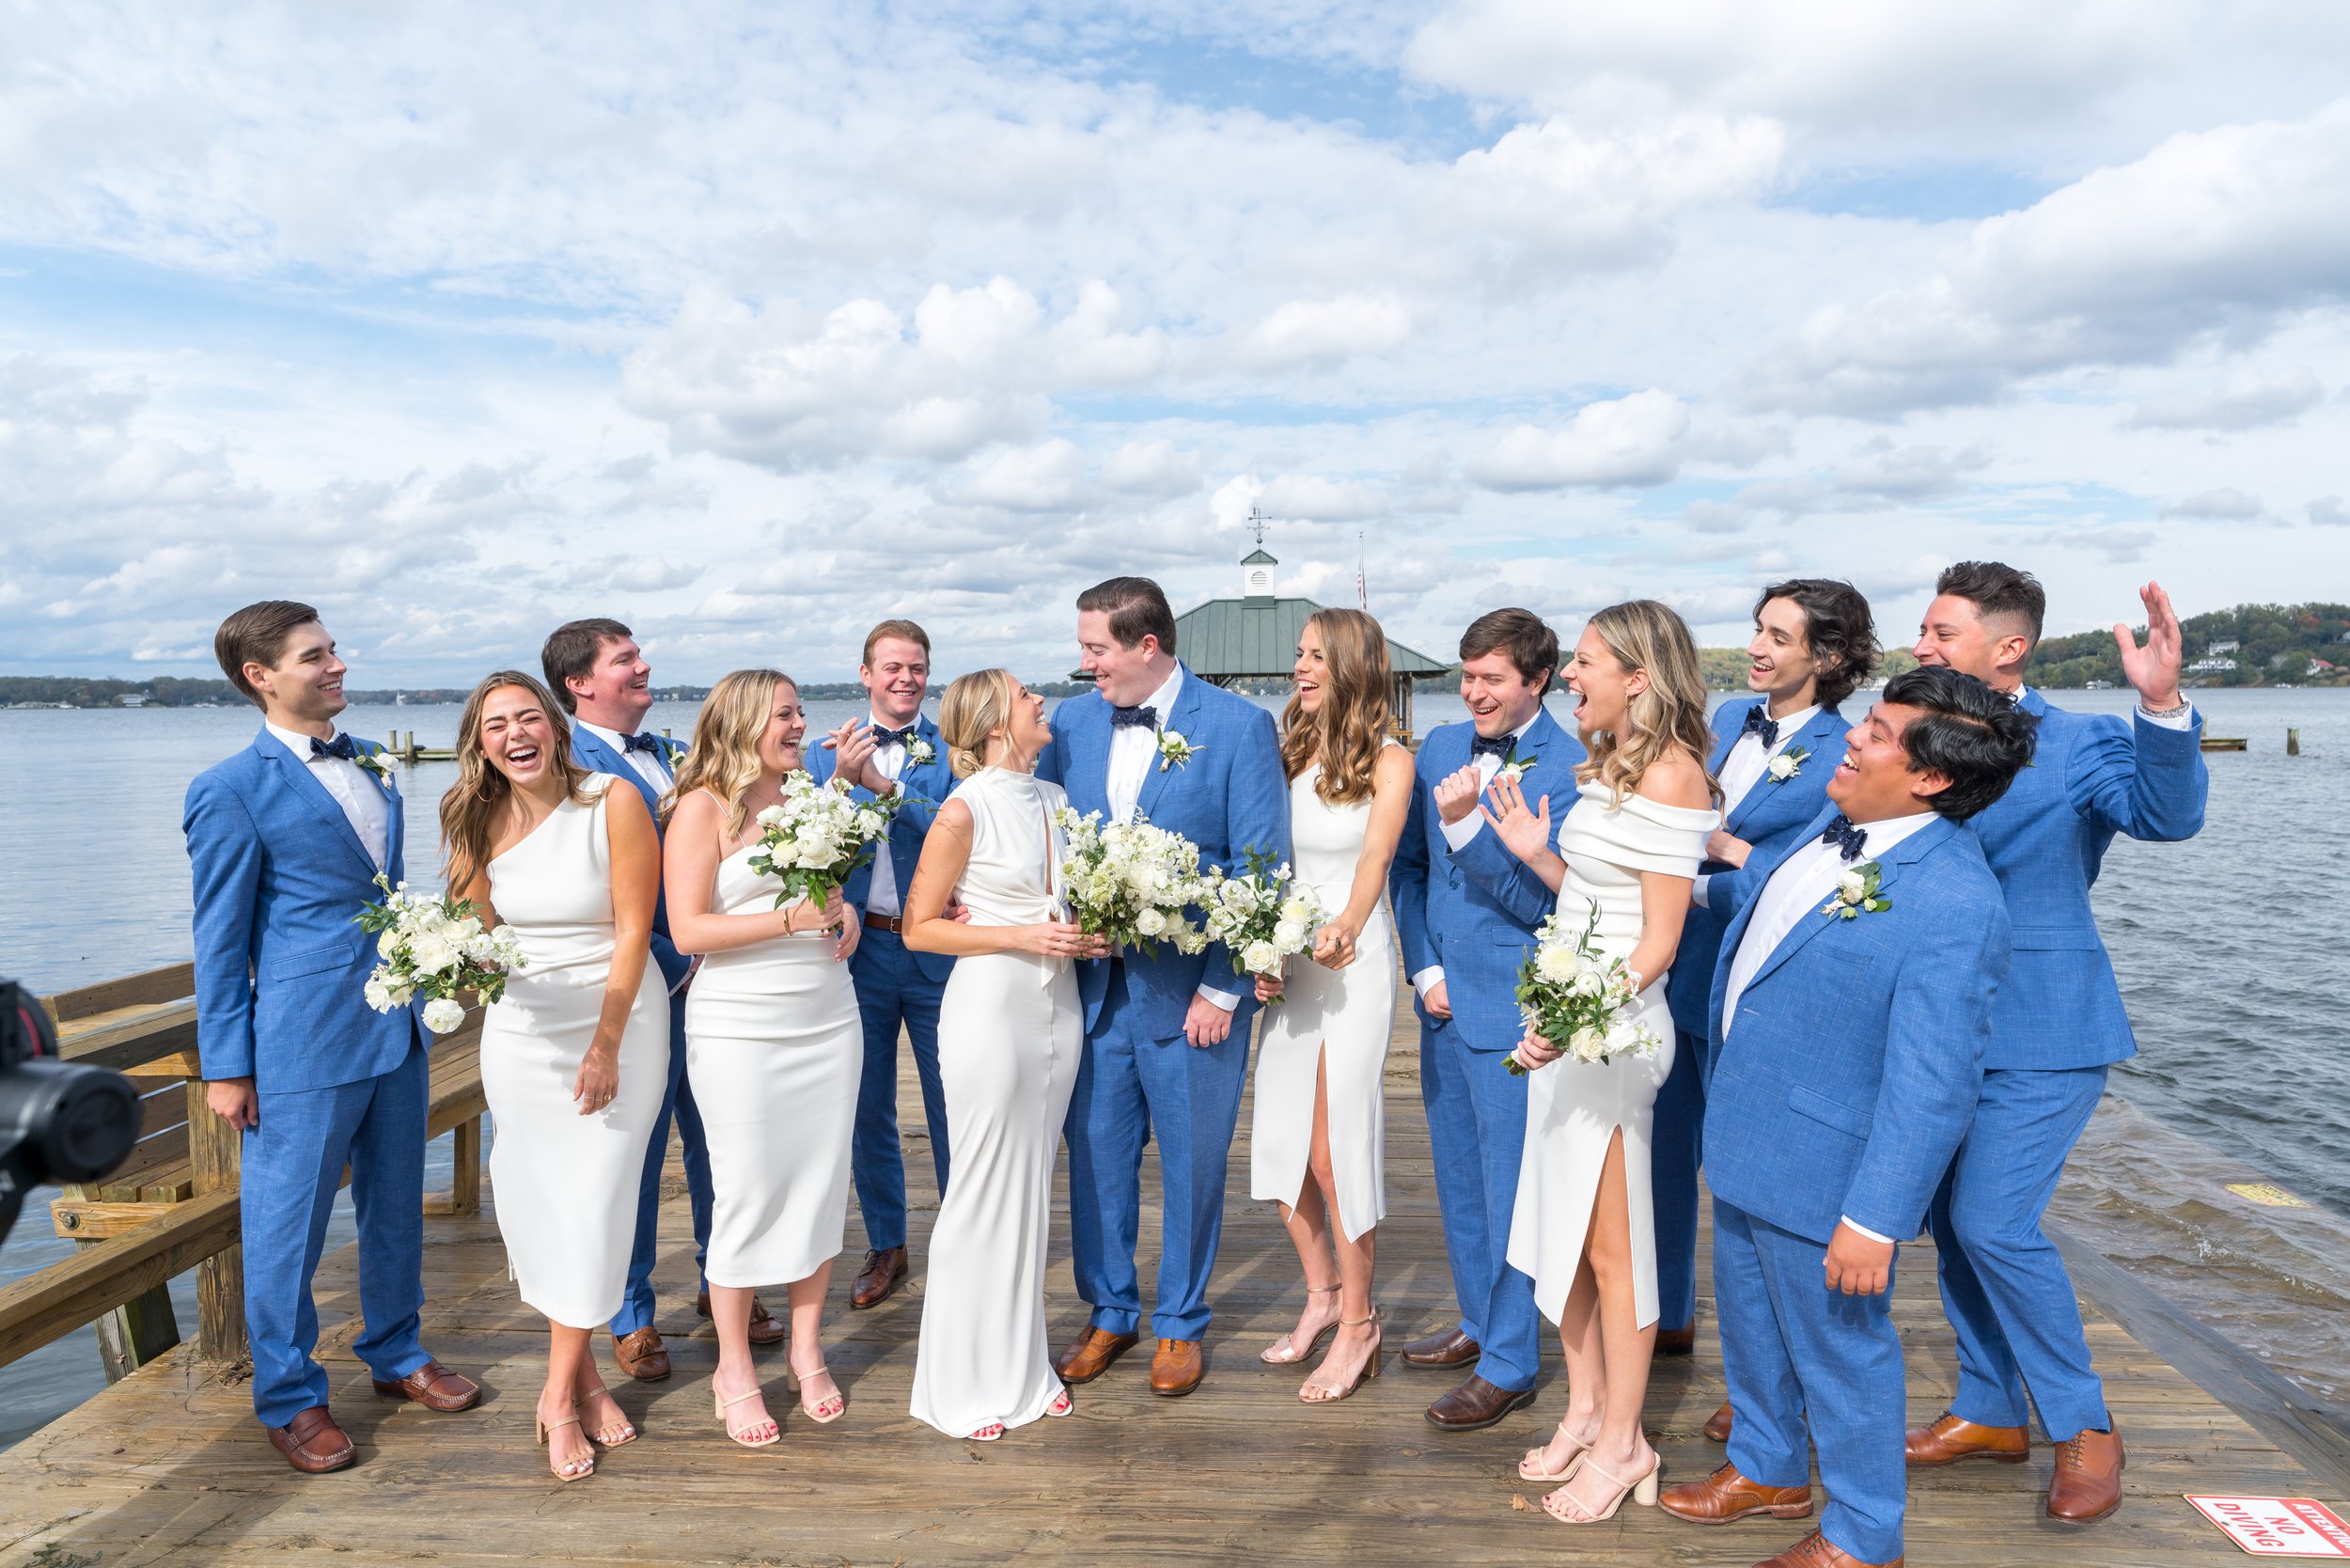 Fun wedding photography with bride, groom and wedding party